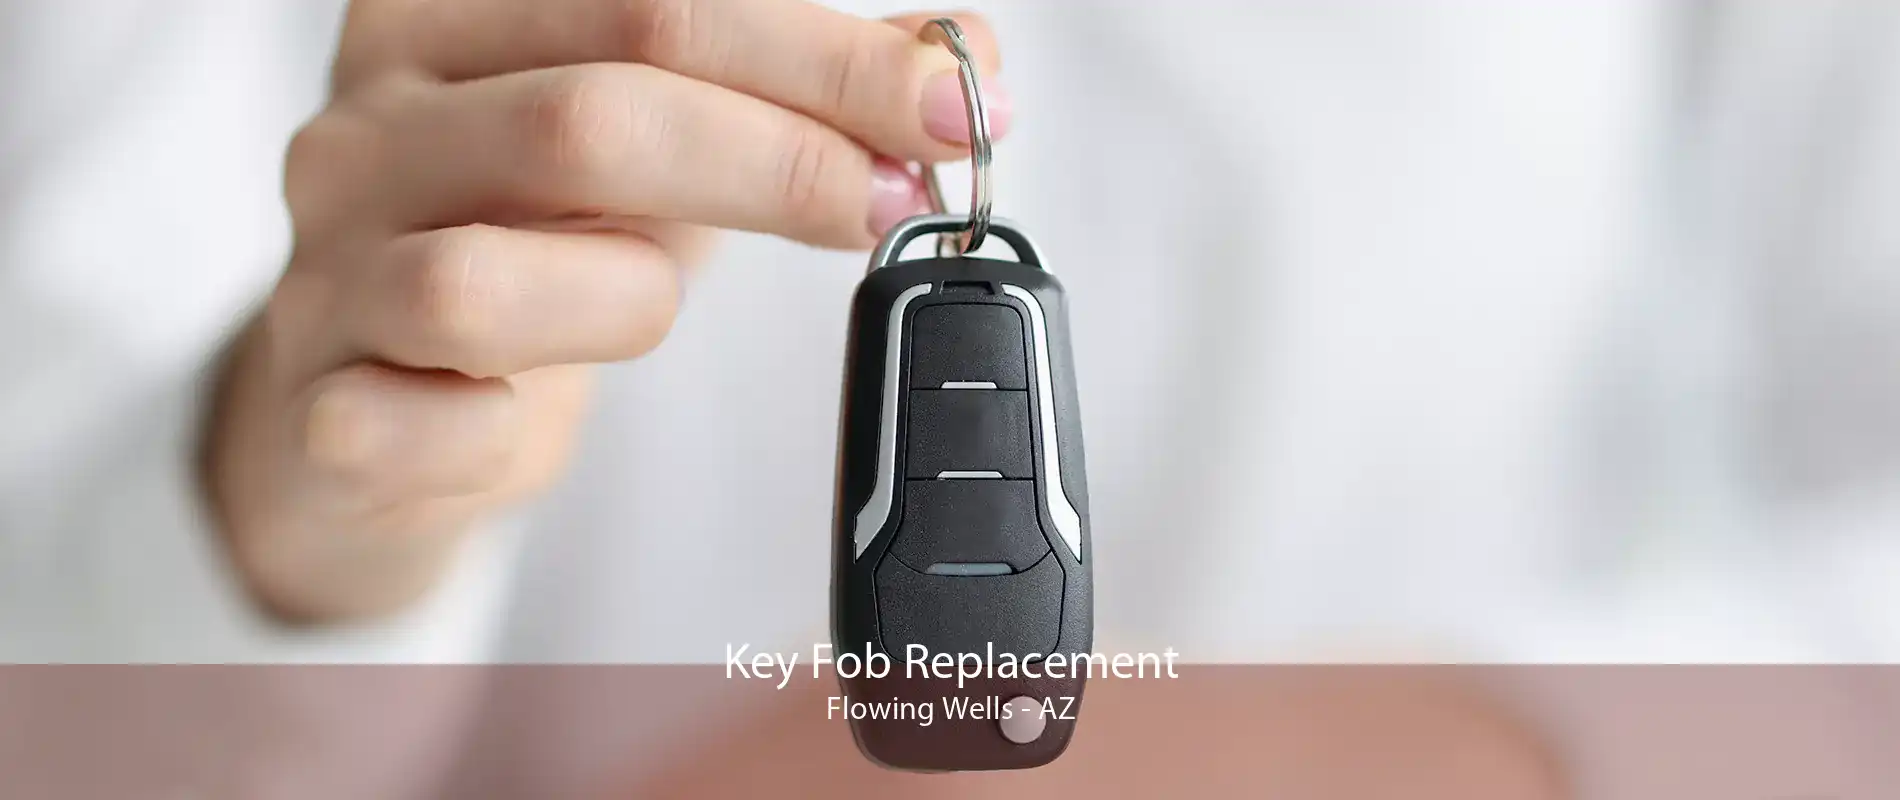 Key Fob Replacement Flowing Wells - AZ